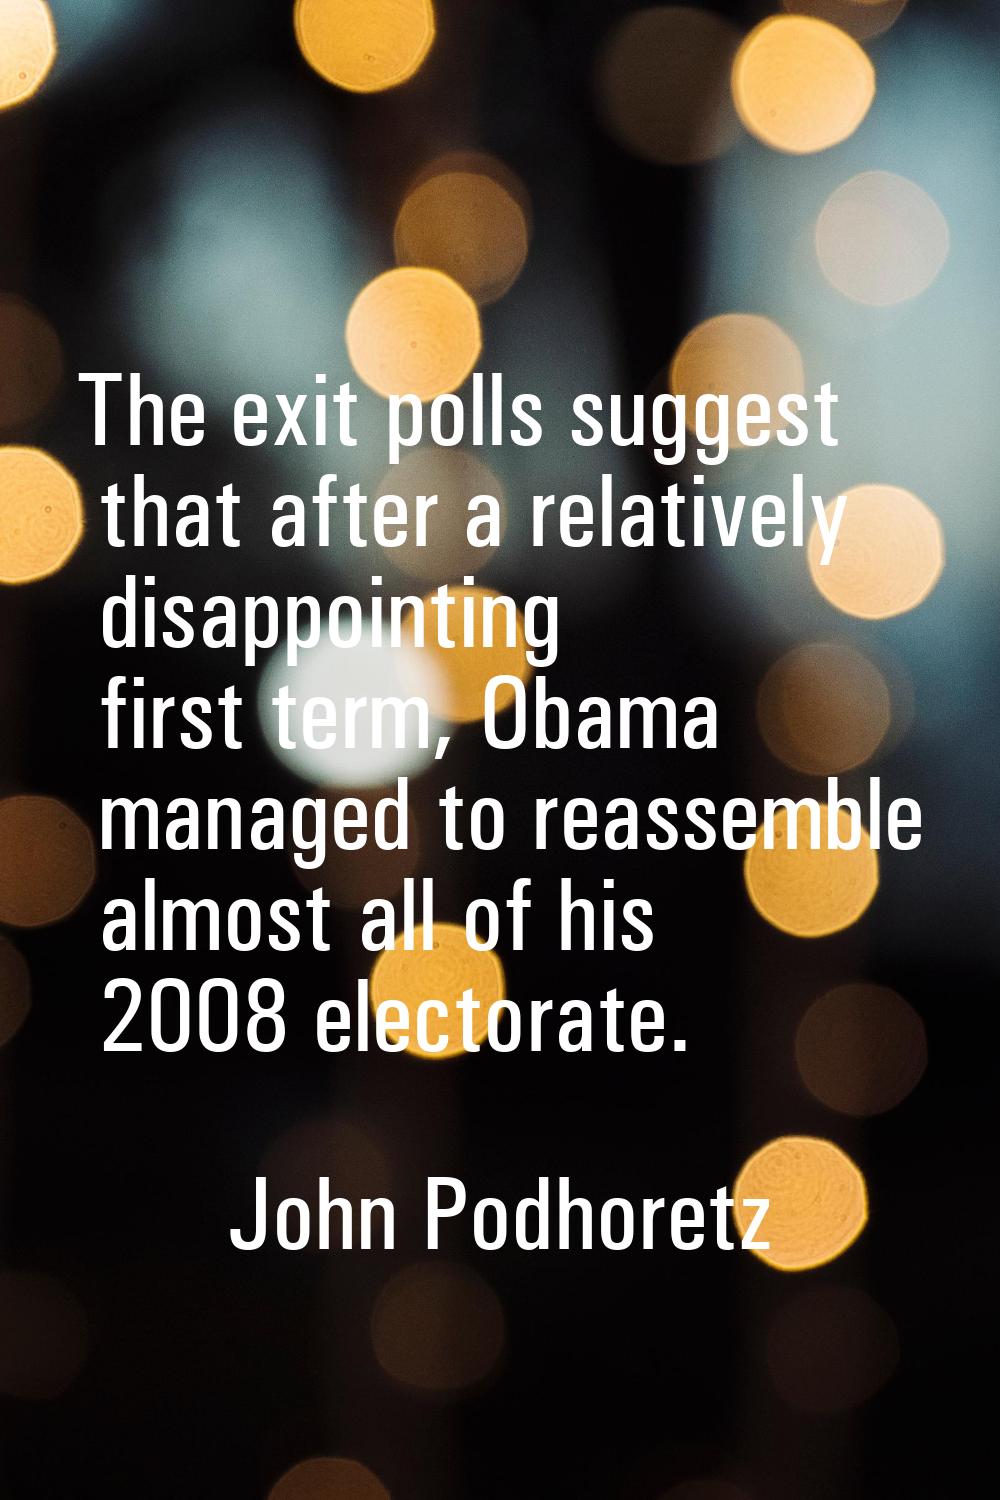 The exit polls suggest that after a relatively disappointing first term, Obama managed to reassembl